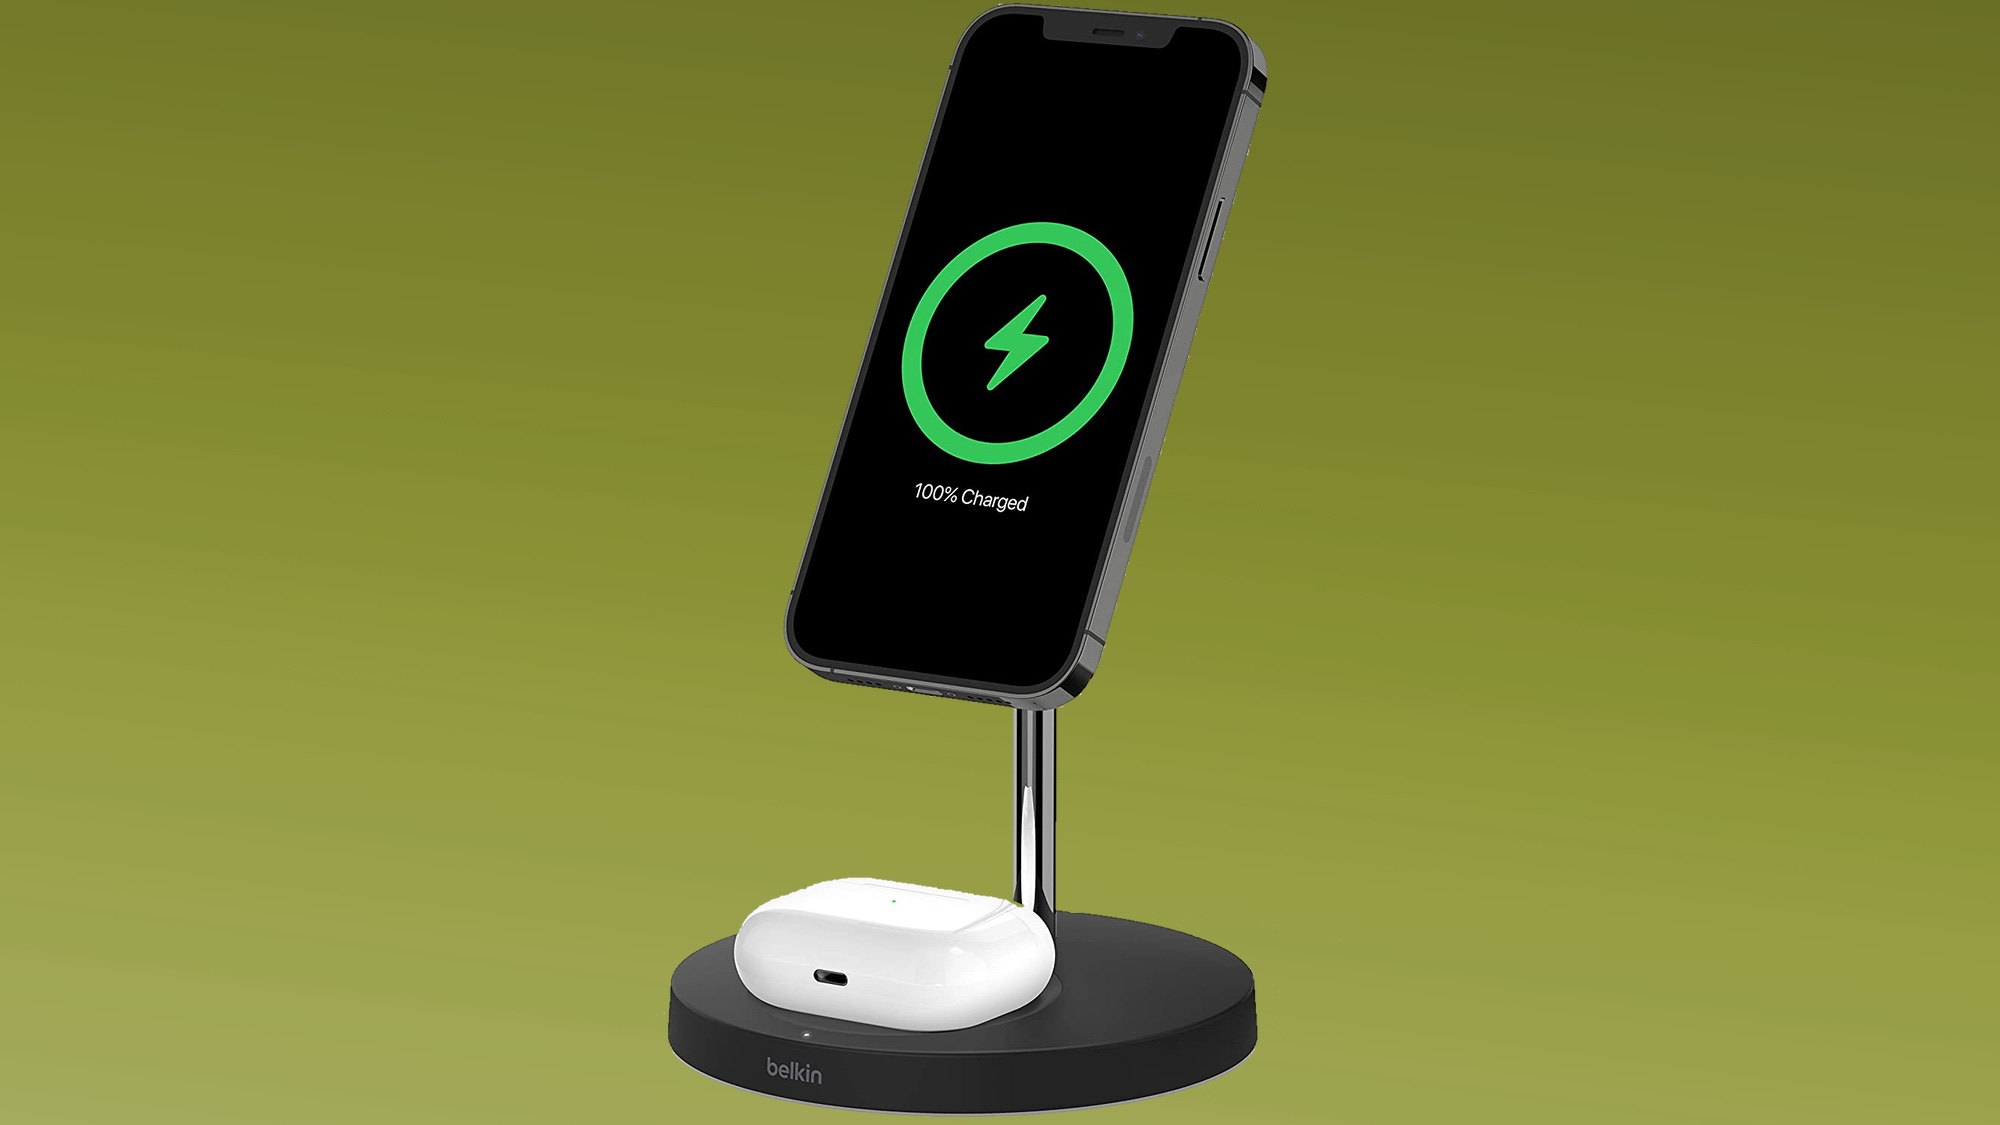 Belkin MagSafe 2-in-1 Wireless Charger is one of the best iPhone 13 accessories